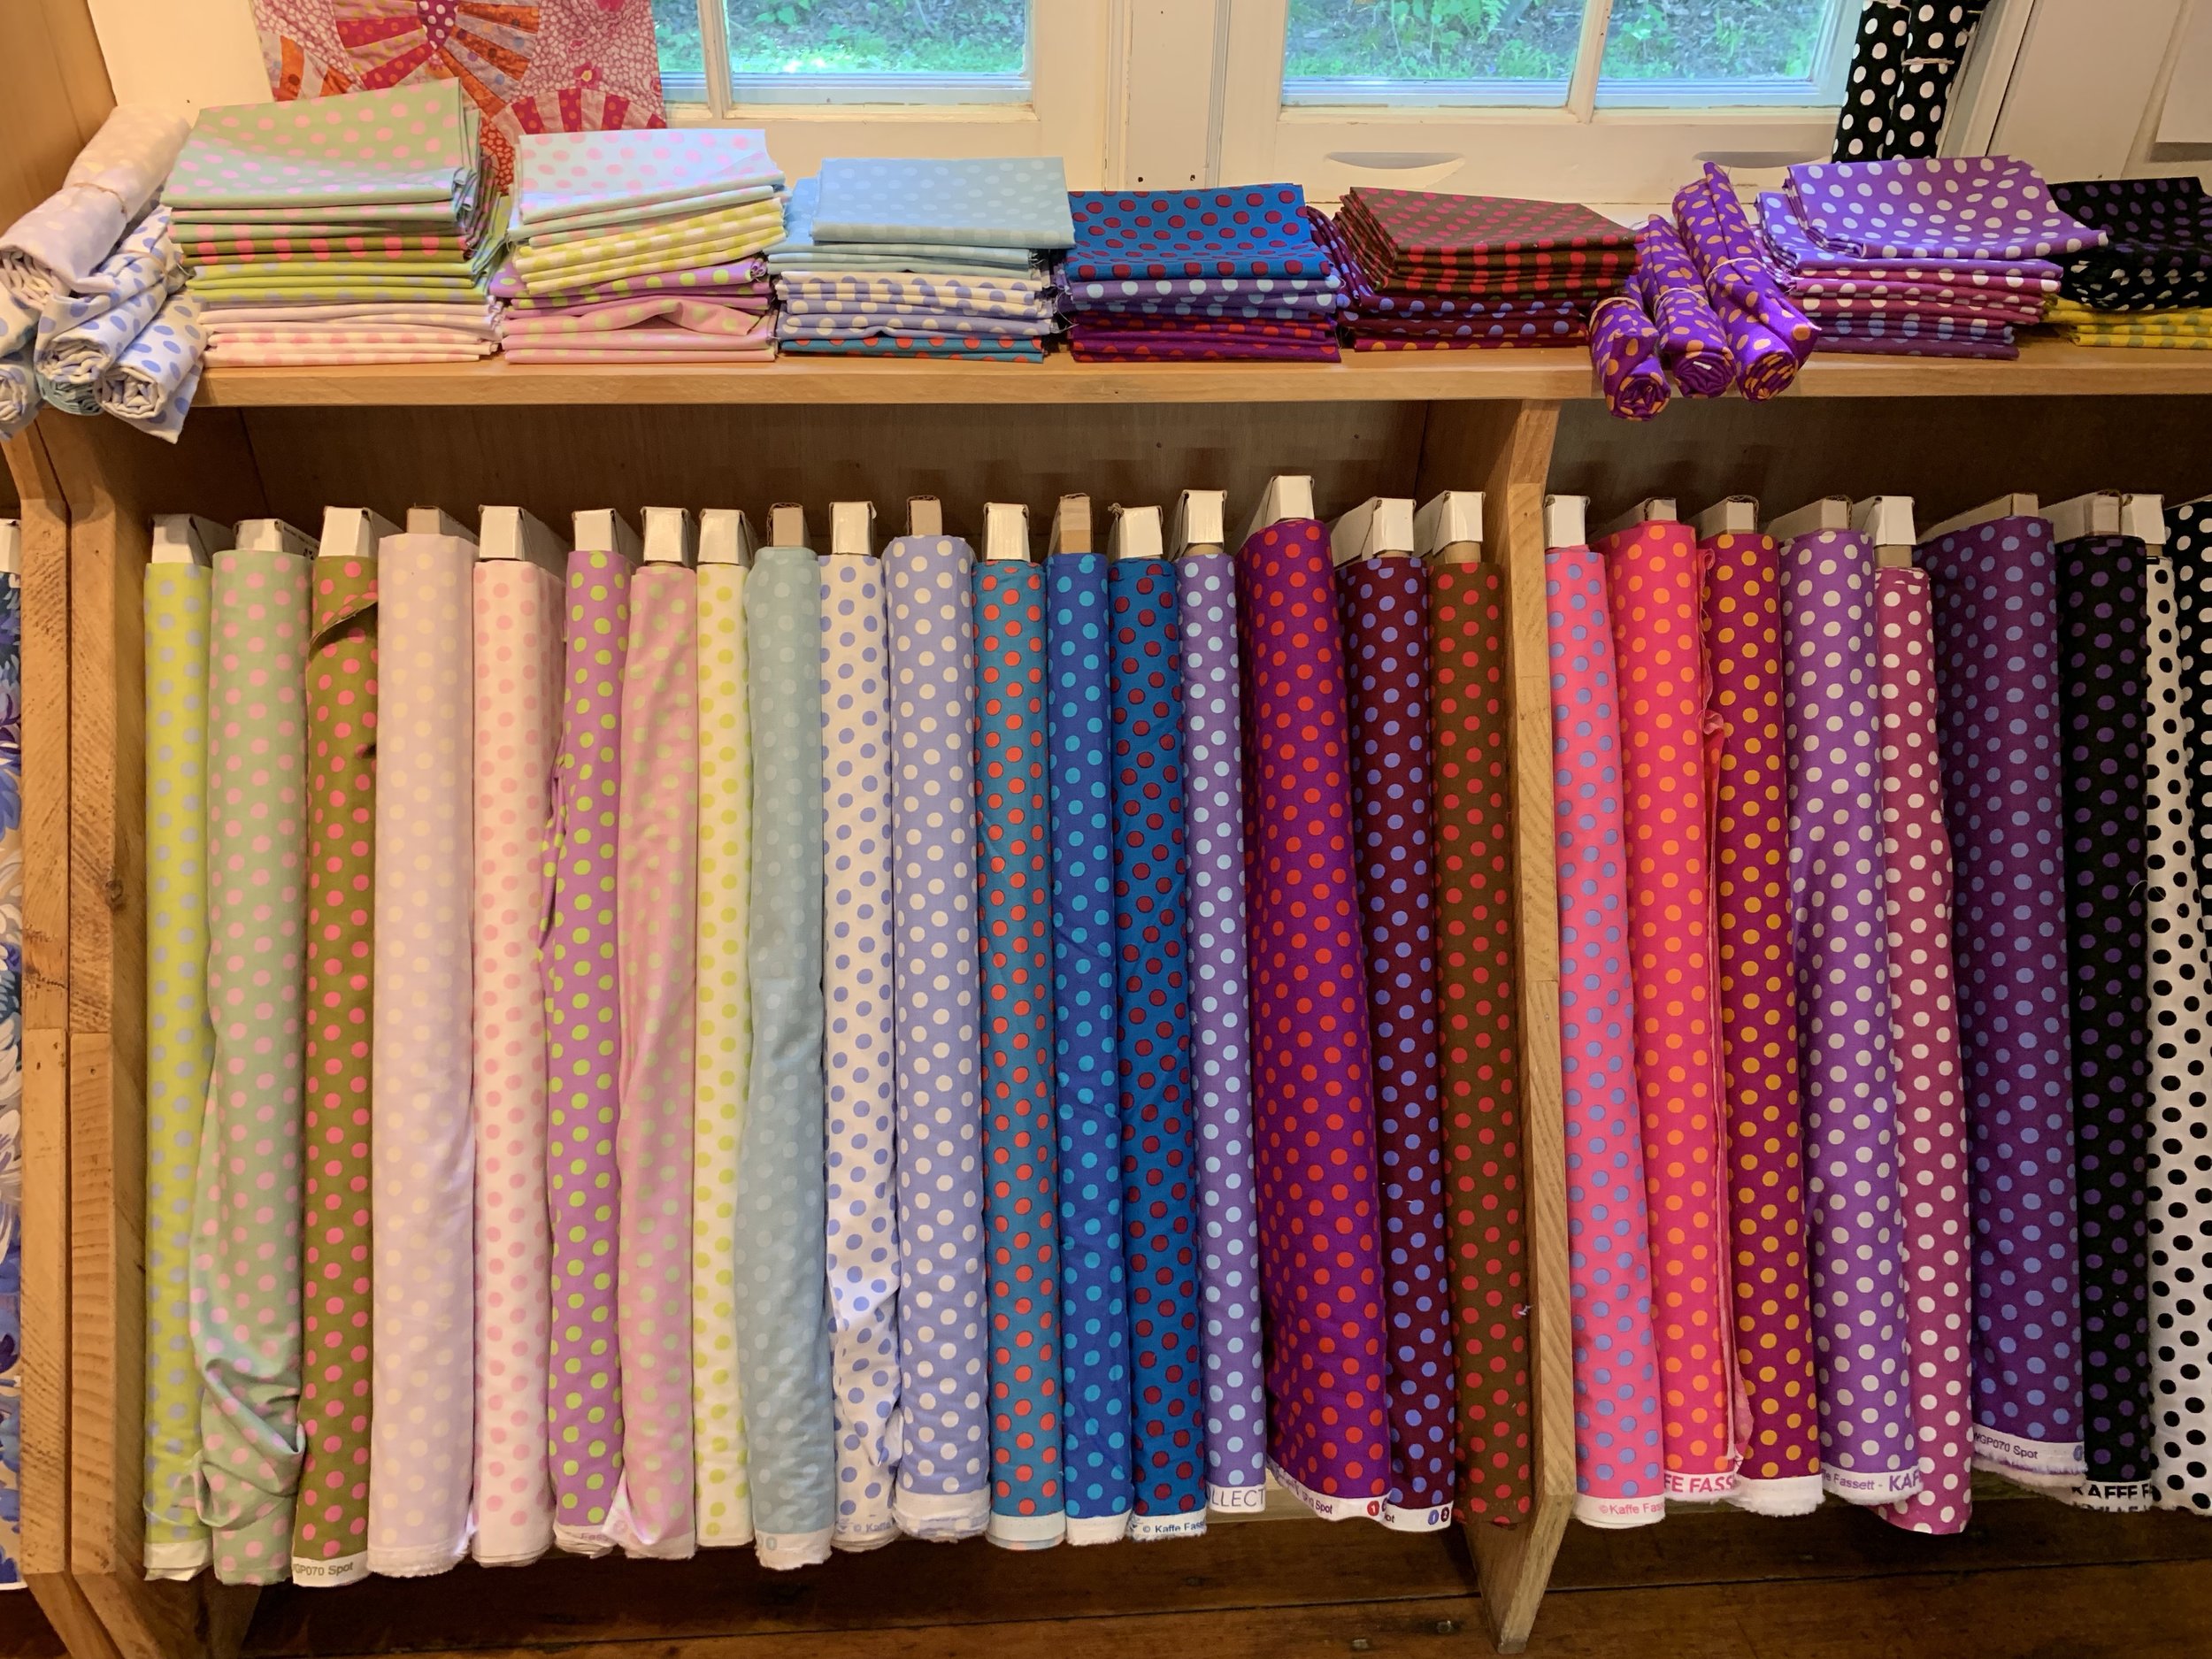 More colorful fabrics at quilt shop